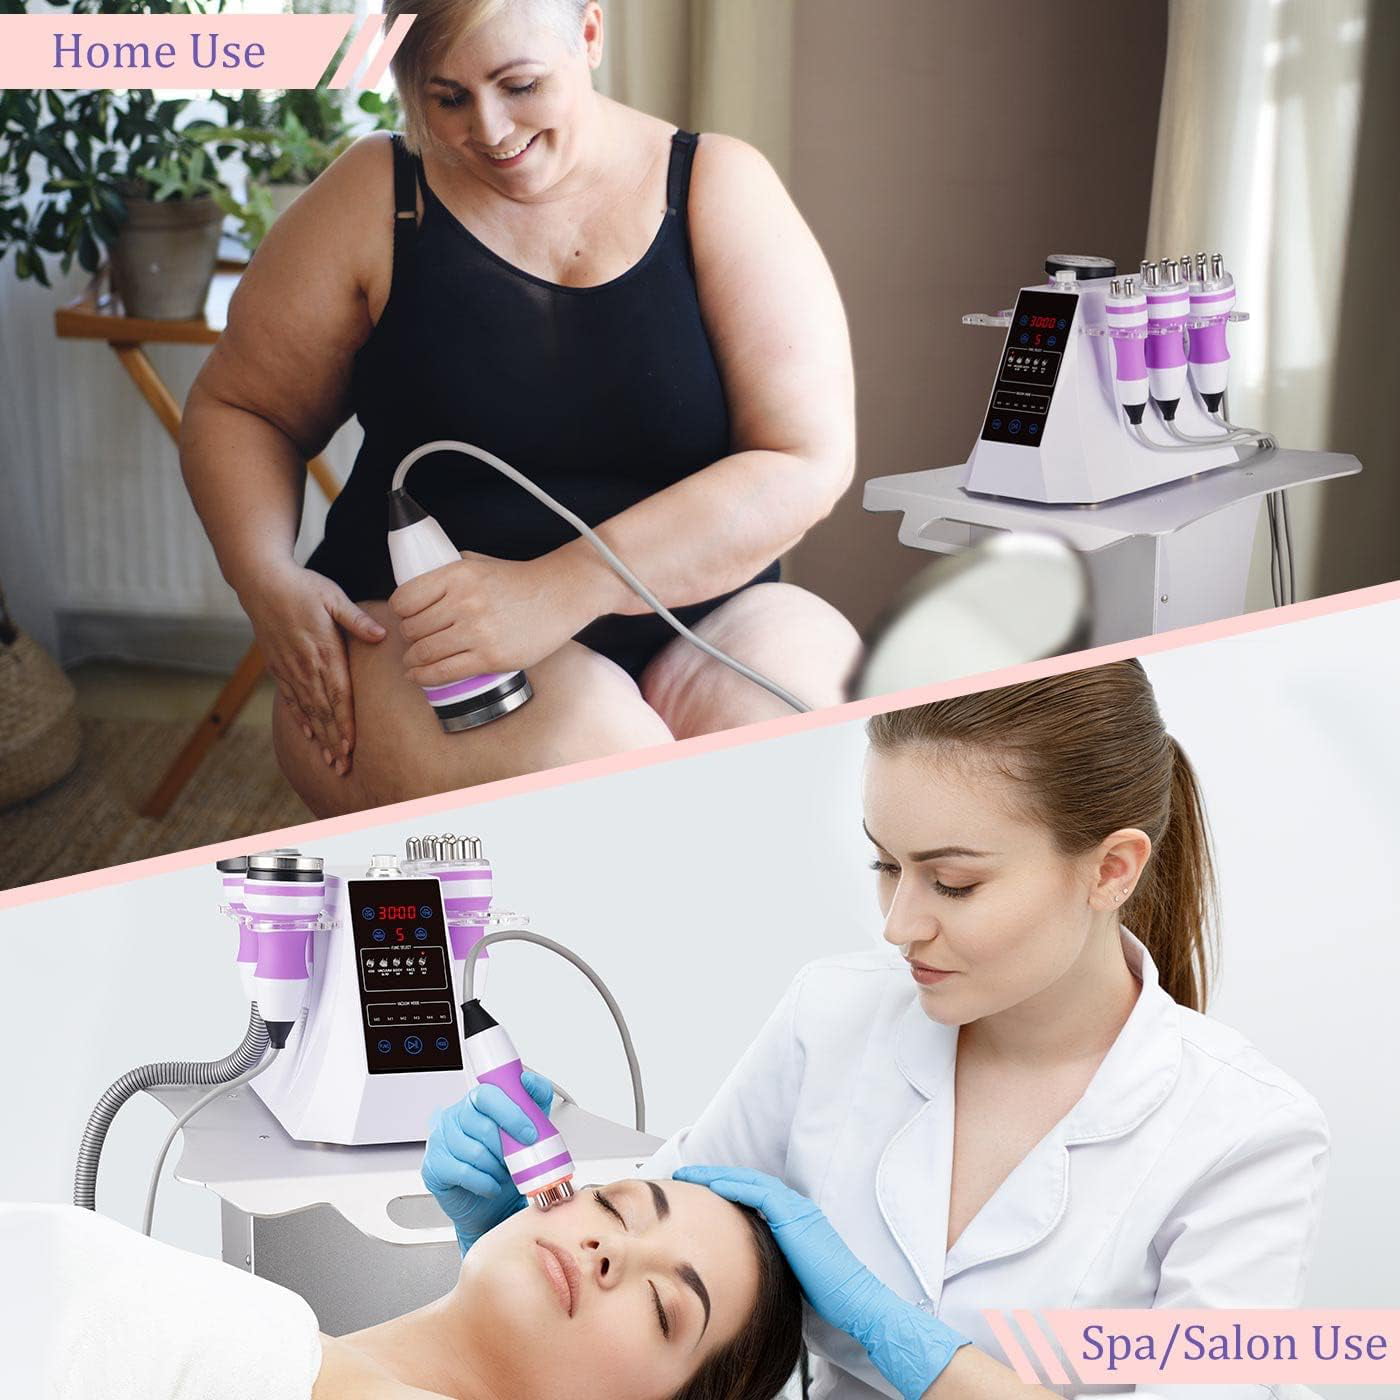 Suerbeaty 5 in 1 Cavitation Machine Multifunctional Body Facial Care Tool for Spa Salon or Home Use